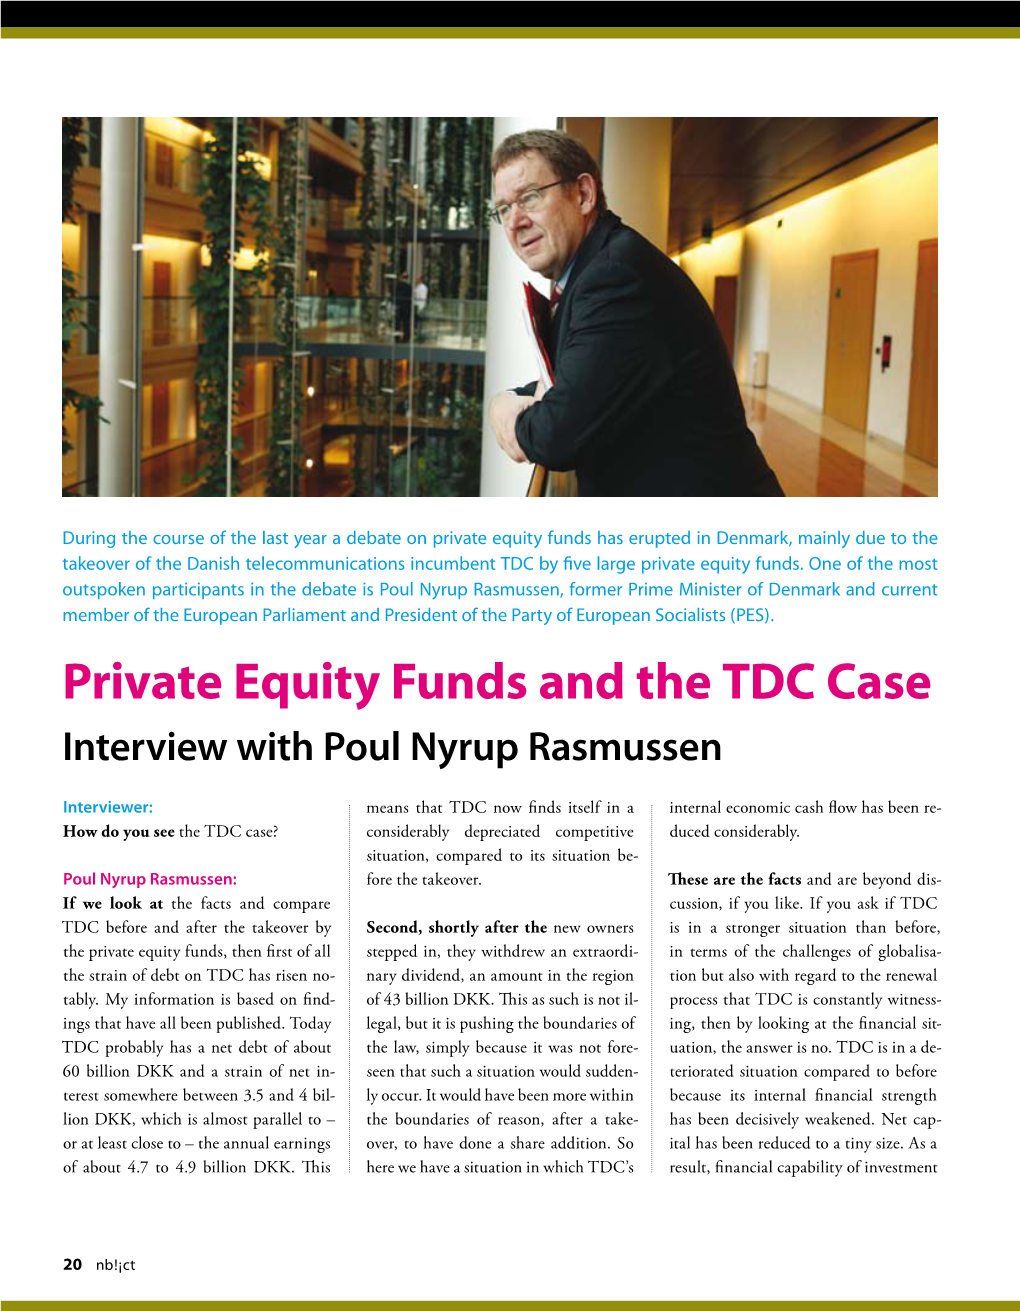 Private Equity Funds and the TDC Case Interview with Poul Nyrup Rasmussen